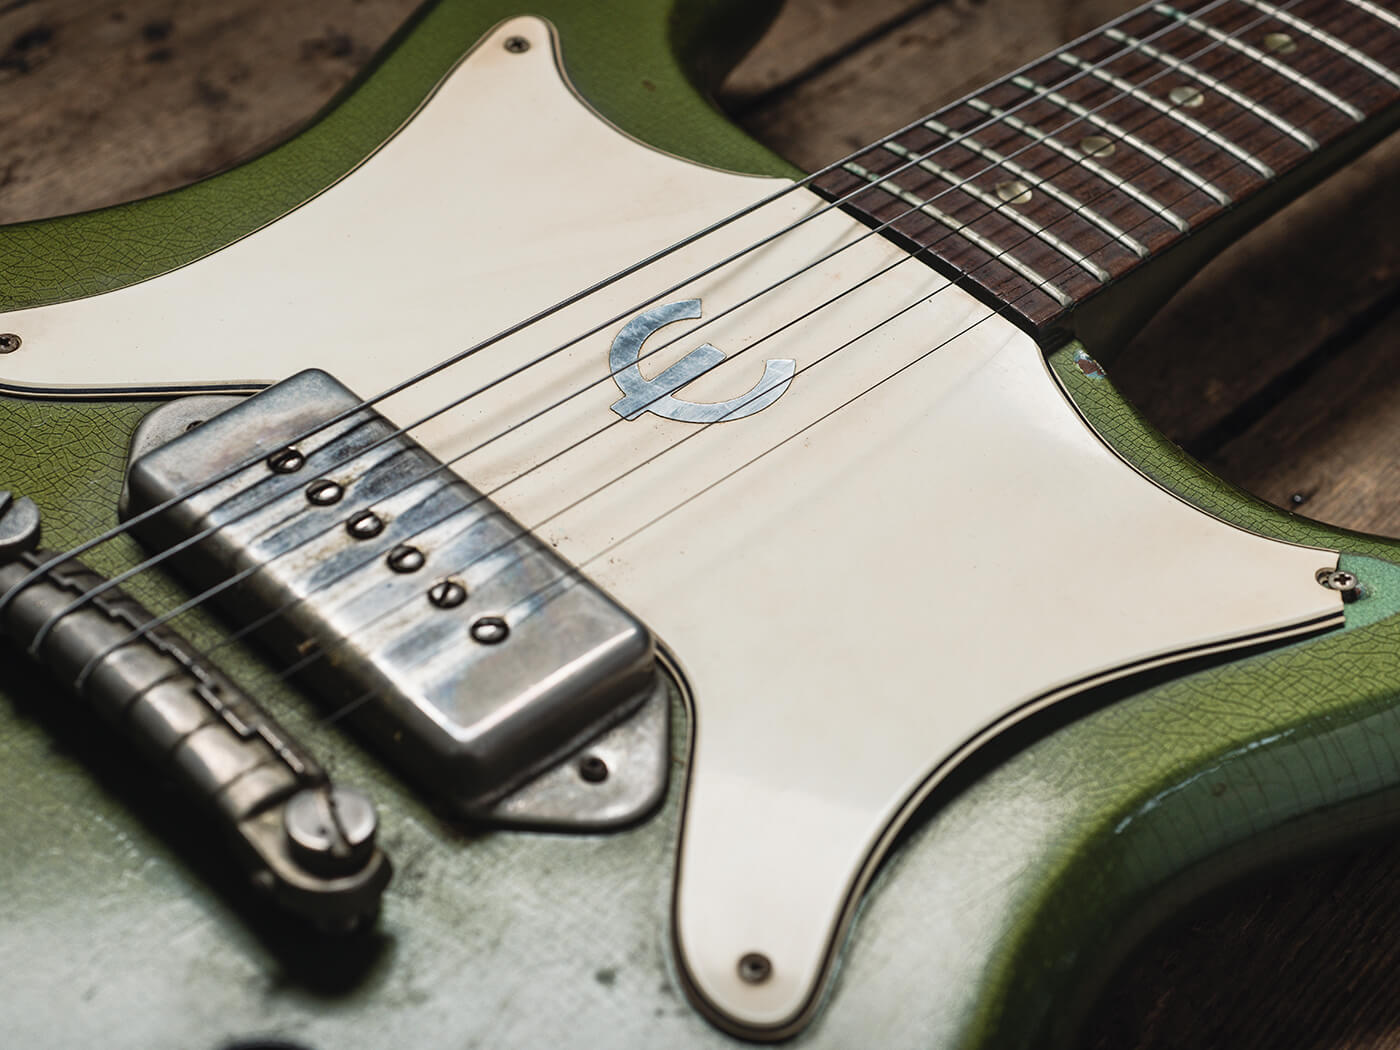 Rory Gallagher's 1963 Epiphone Coronet